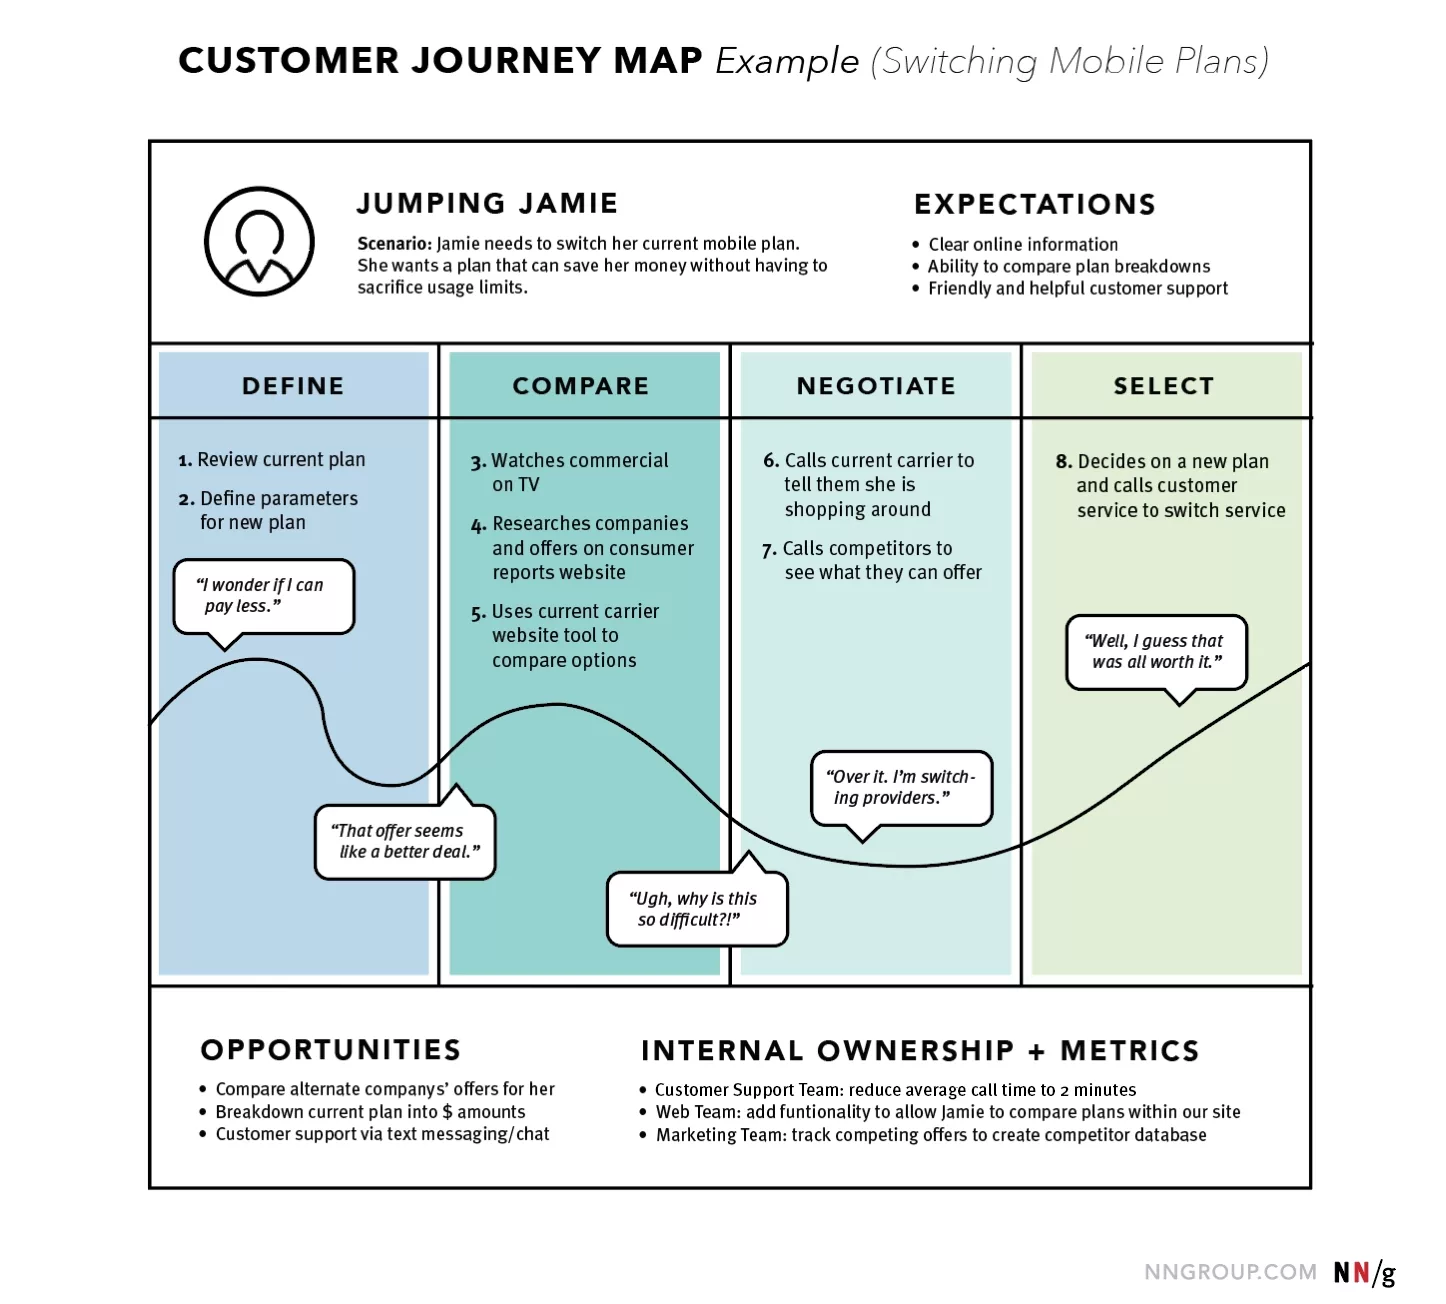 <em>An example of a simplistic, high-level customer-journey map depicting how the persona ��“Jumping Jamie” switches her mobile plan.</em>